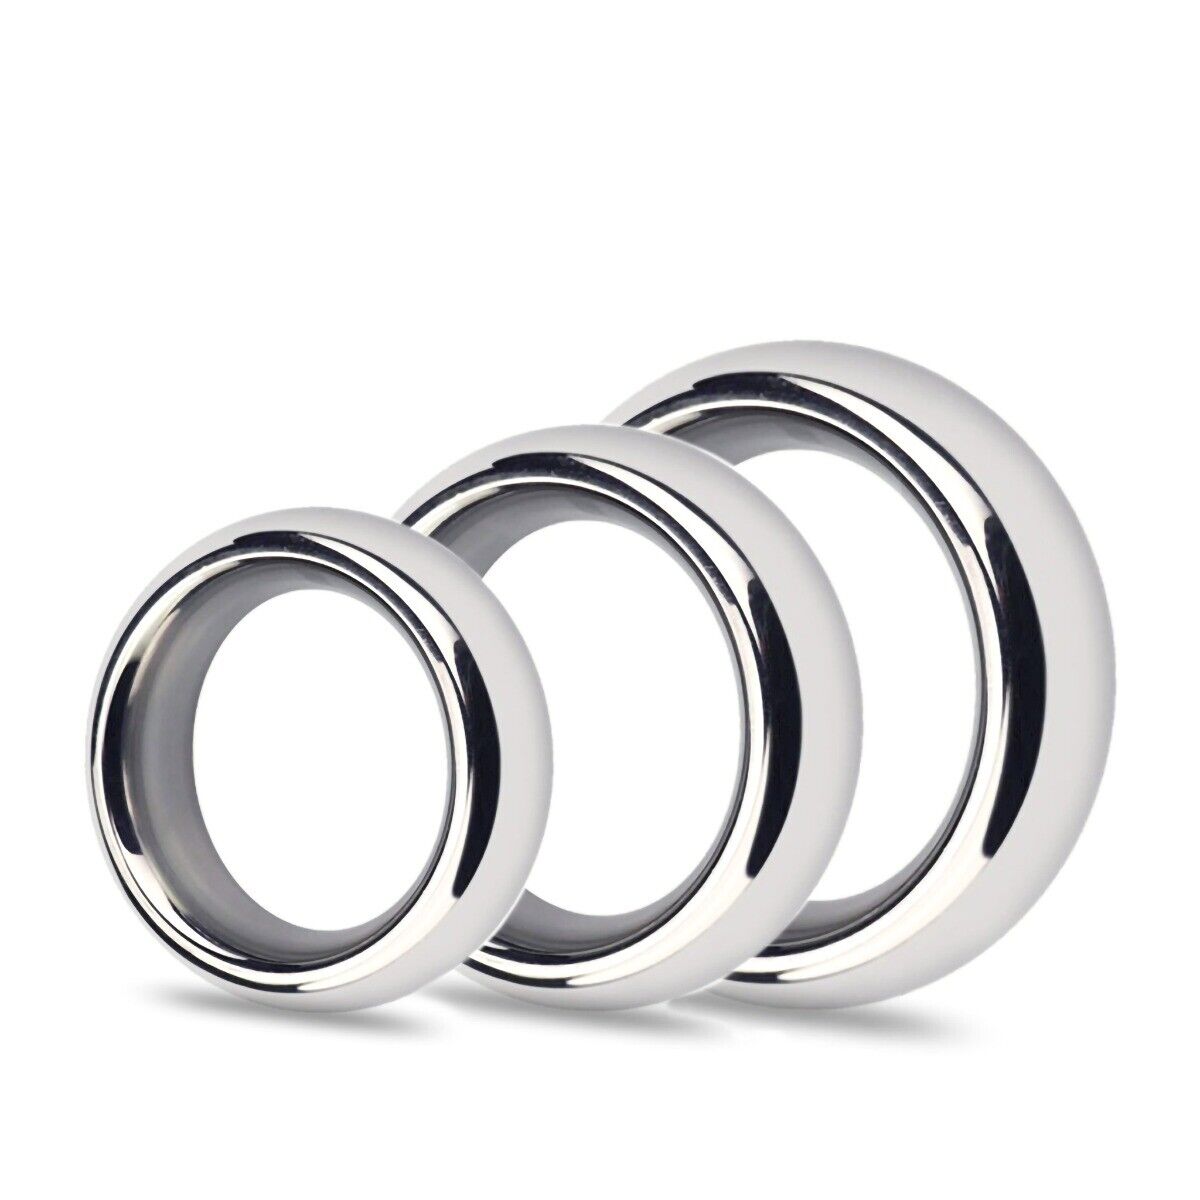 Stainless Steel Heavy Weight Penis Cock Ring Set Donut Band